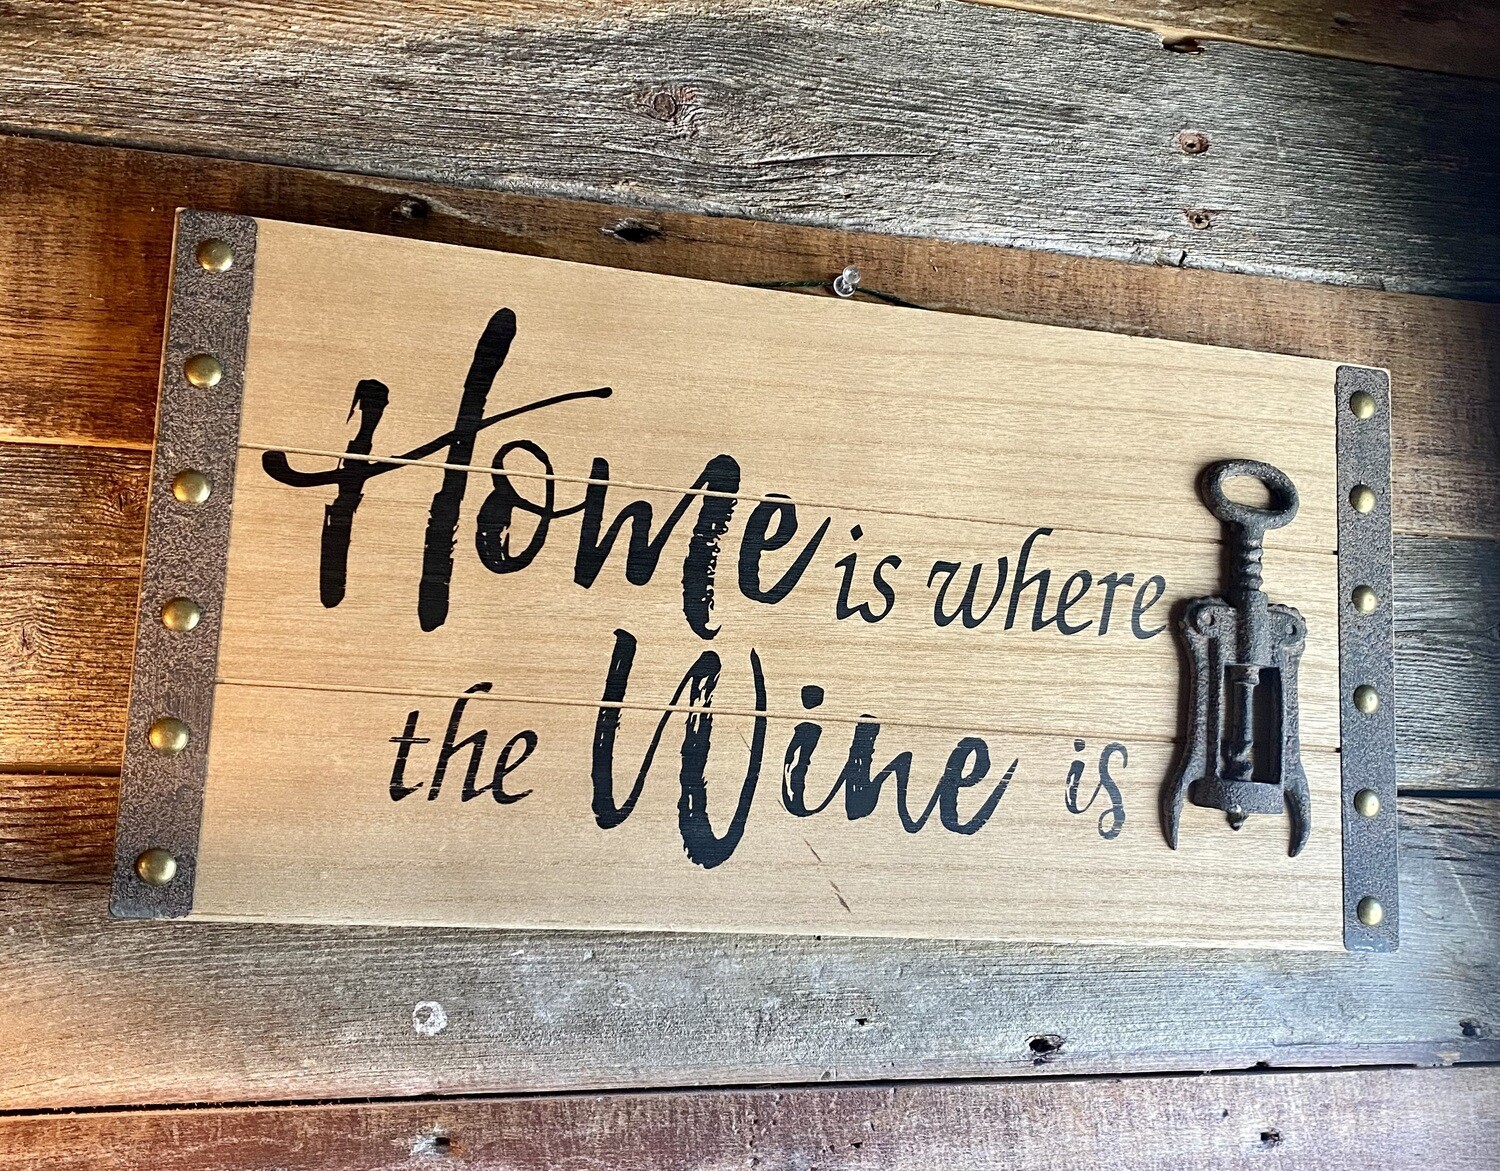 Home Is Where The Wine Is Sign